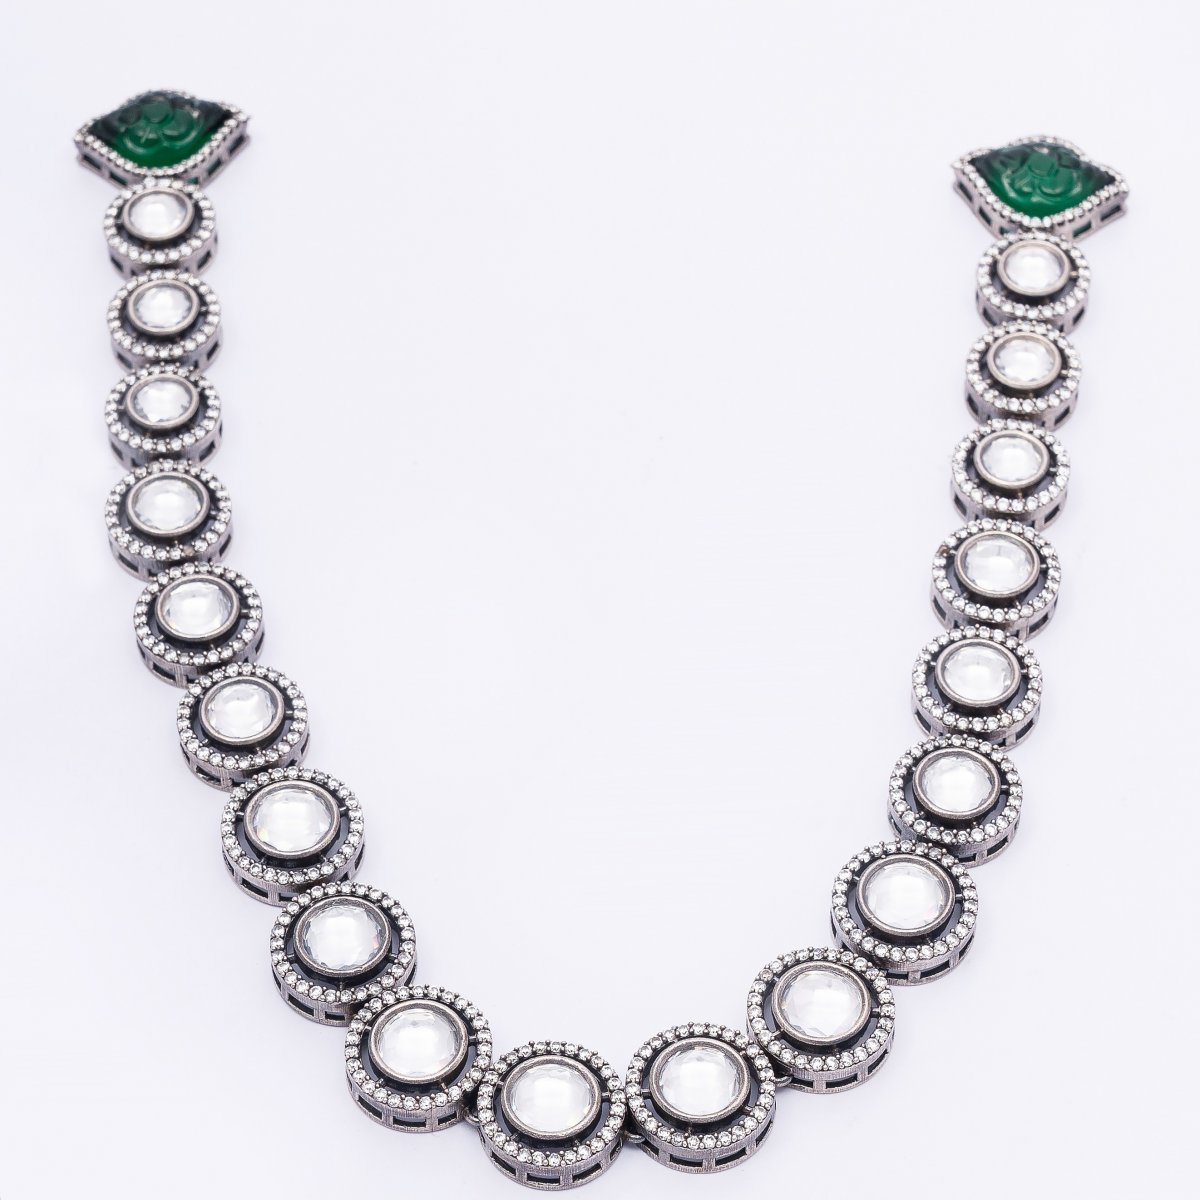 92.5 SILVER TRADITIONAL PARTY NECKLACE FOR WOMEN